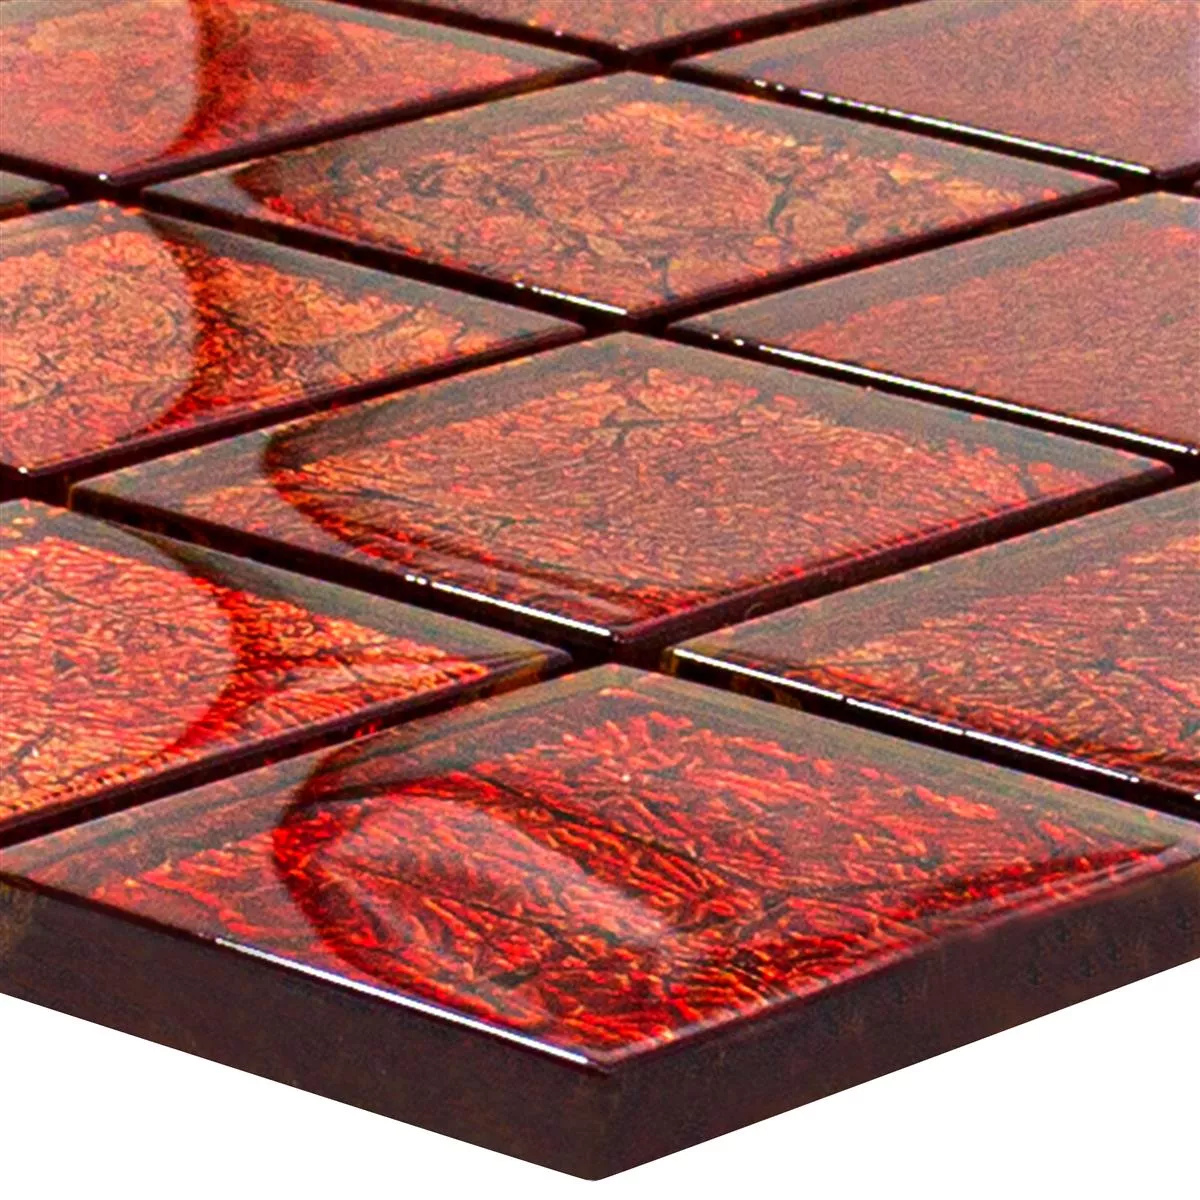 Glass Mosaic Tiles Seraphina Red Square 47